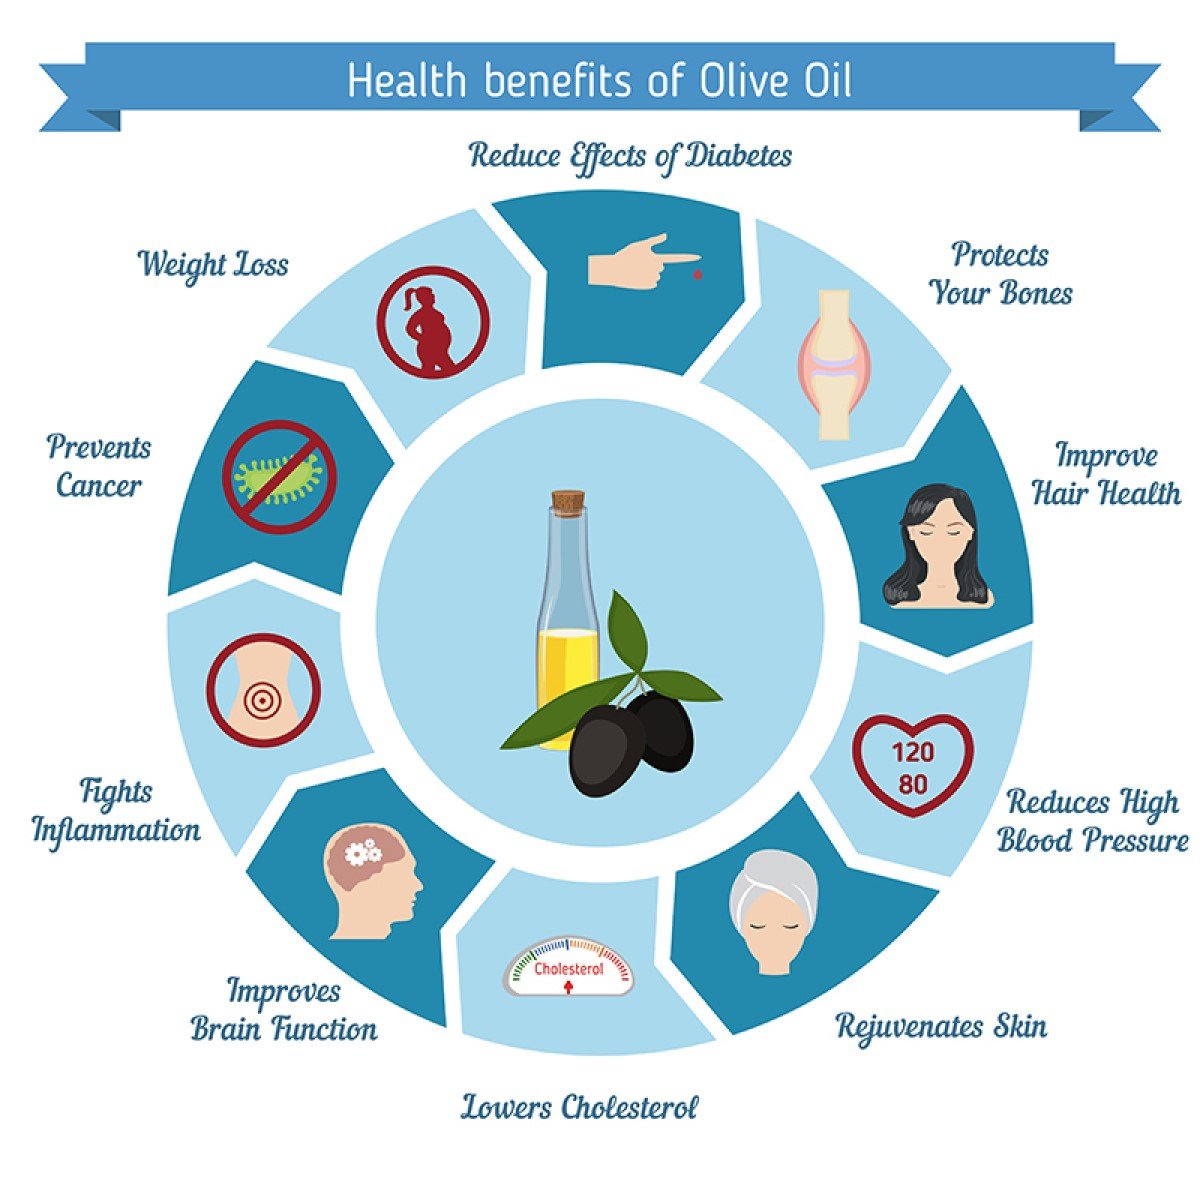 health benefits of olive oil infographic